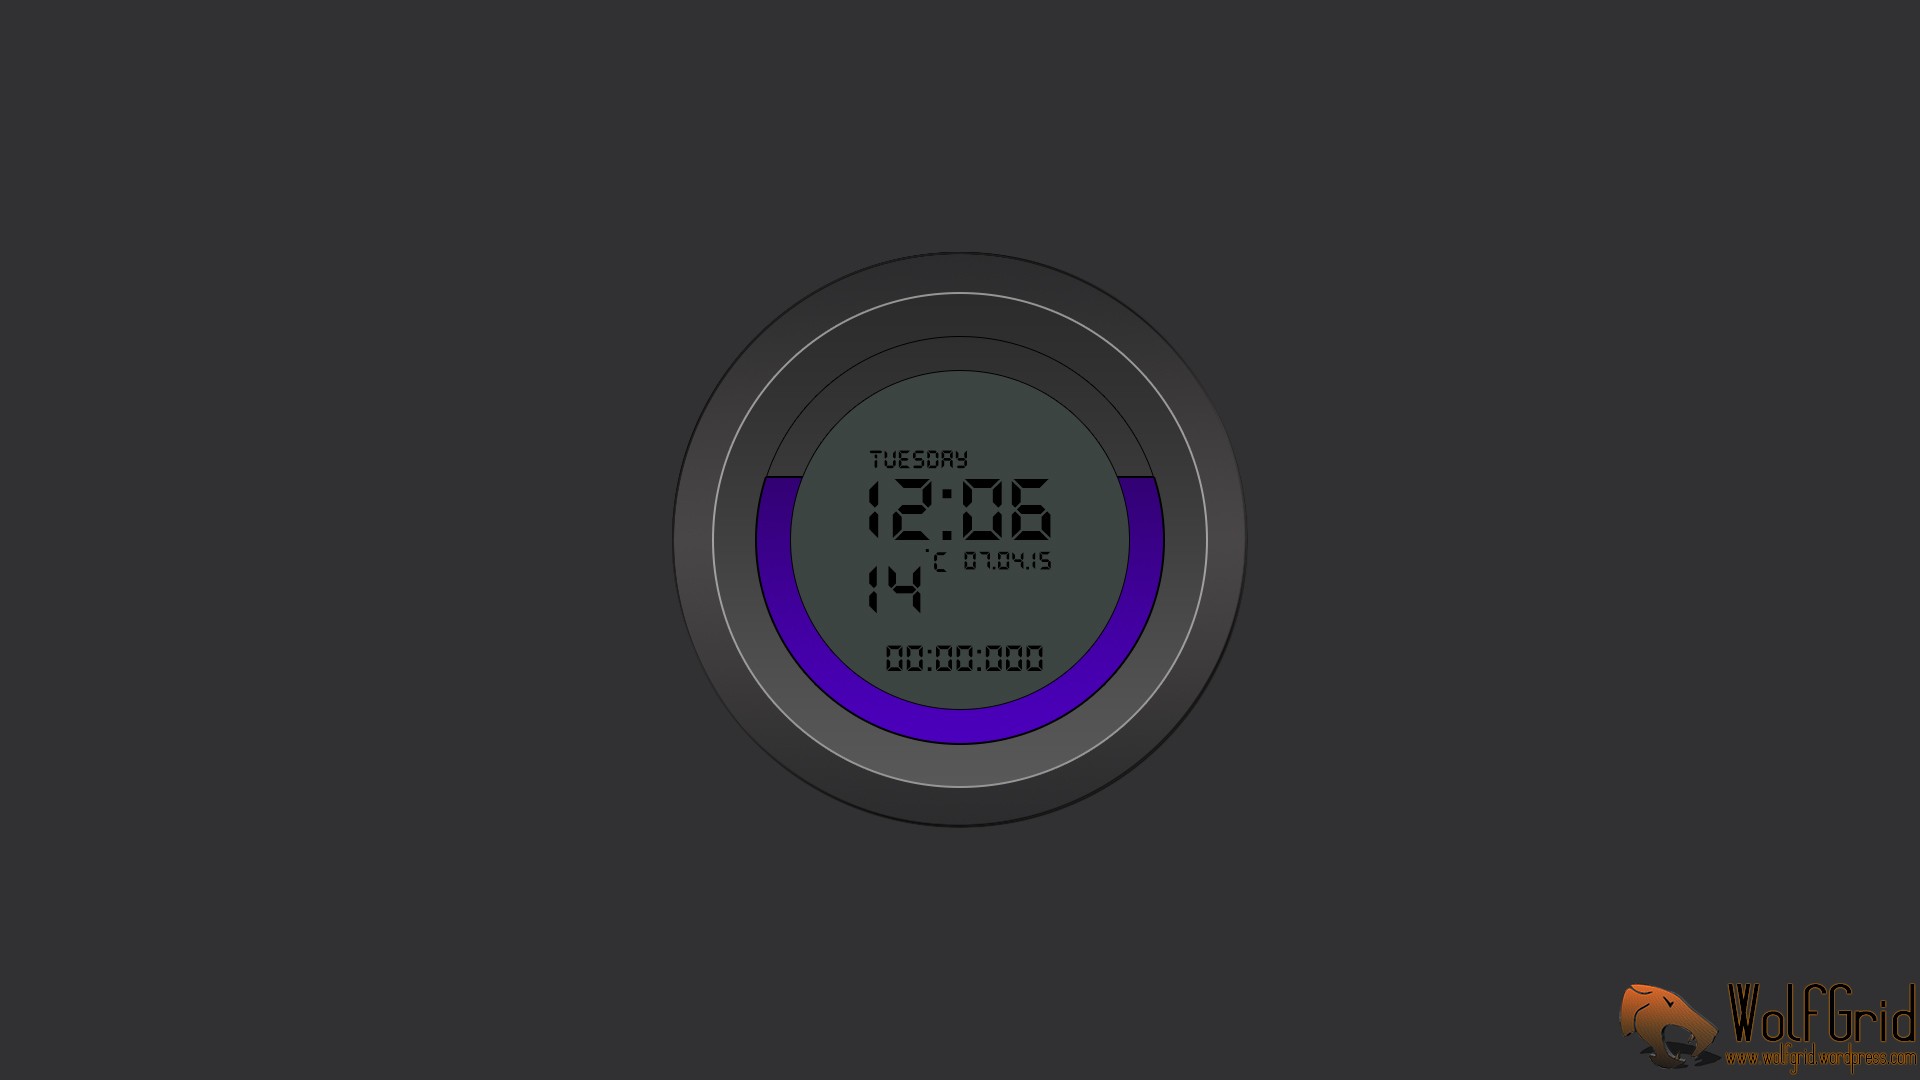 General 1920x1080 digital art clocks simple background numbers technology Tuesday